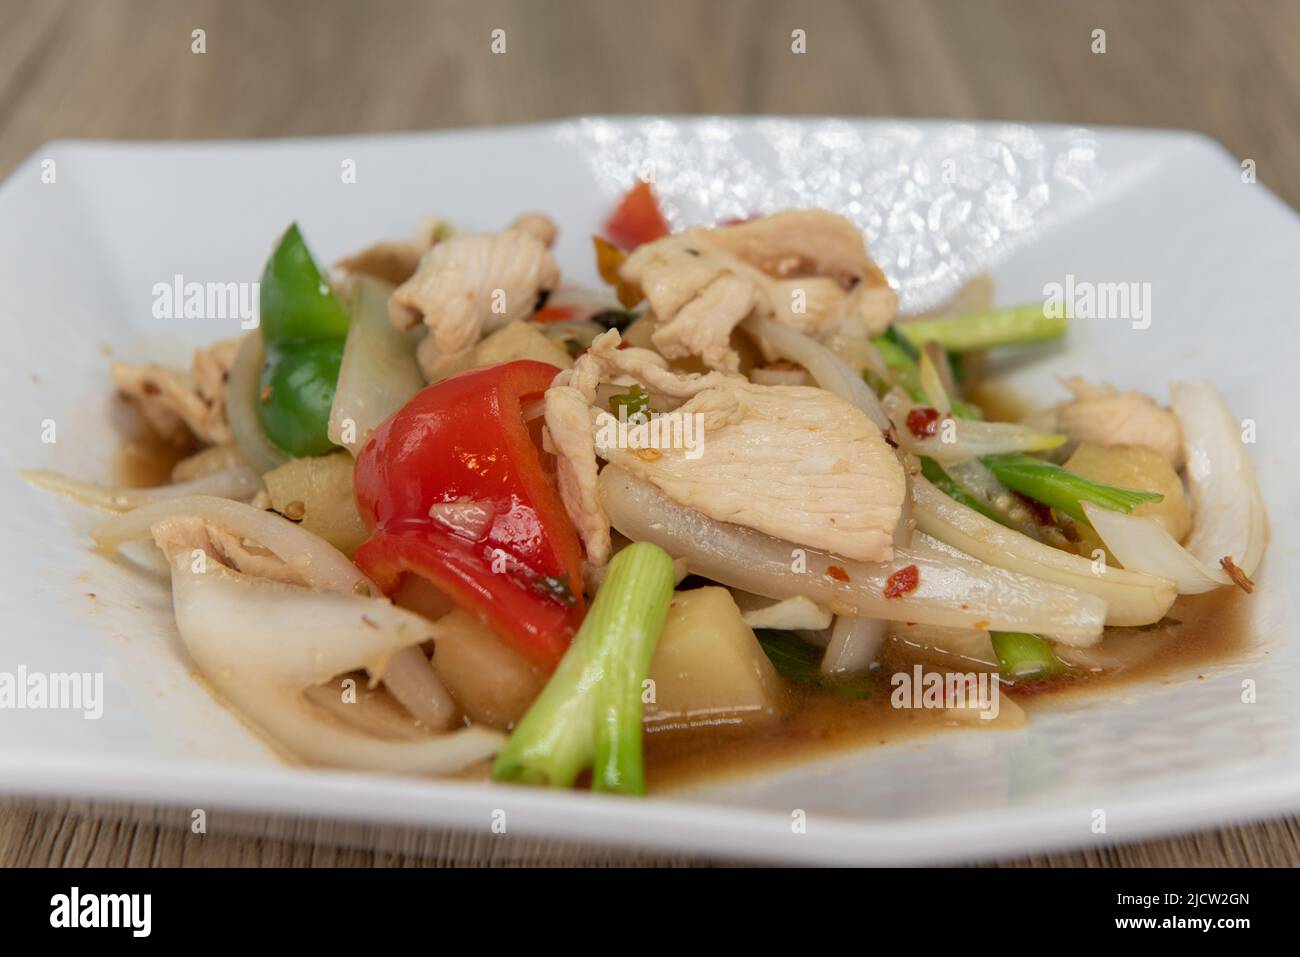 Spicy plate of chicken with vegetable stir fry, topped with pineapple and ready to eat. Stock Photo